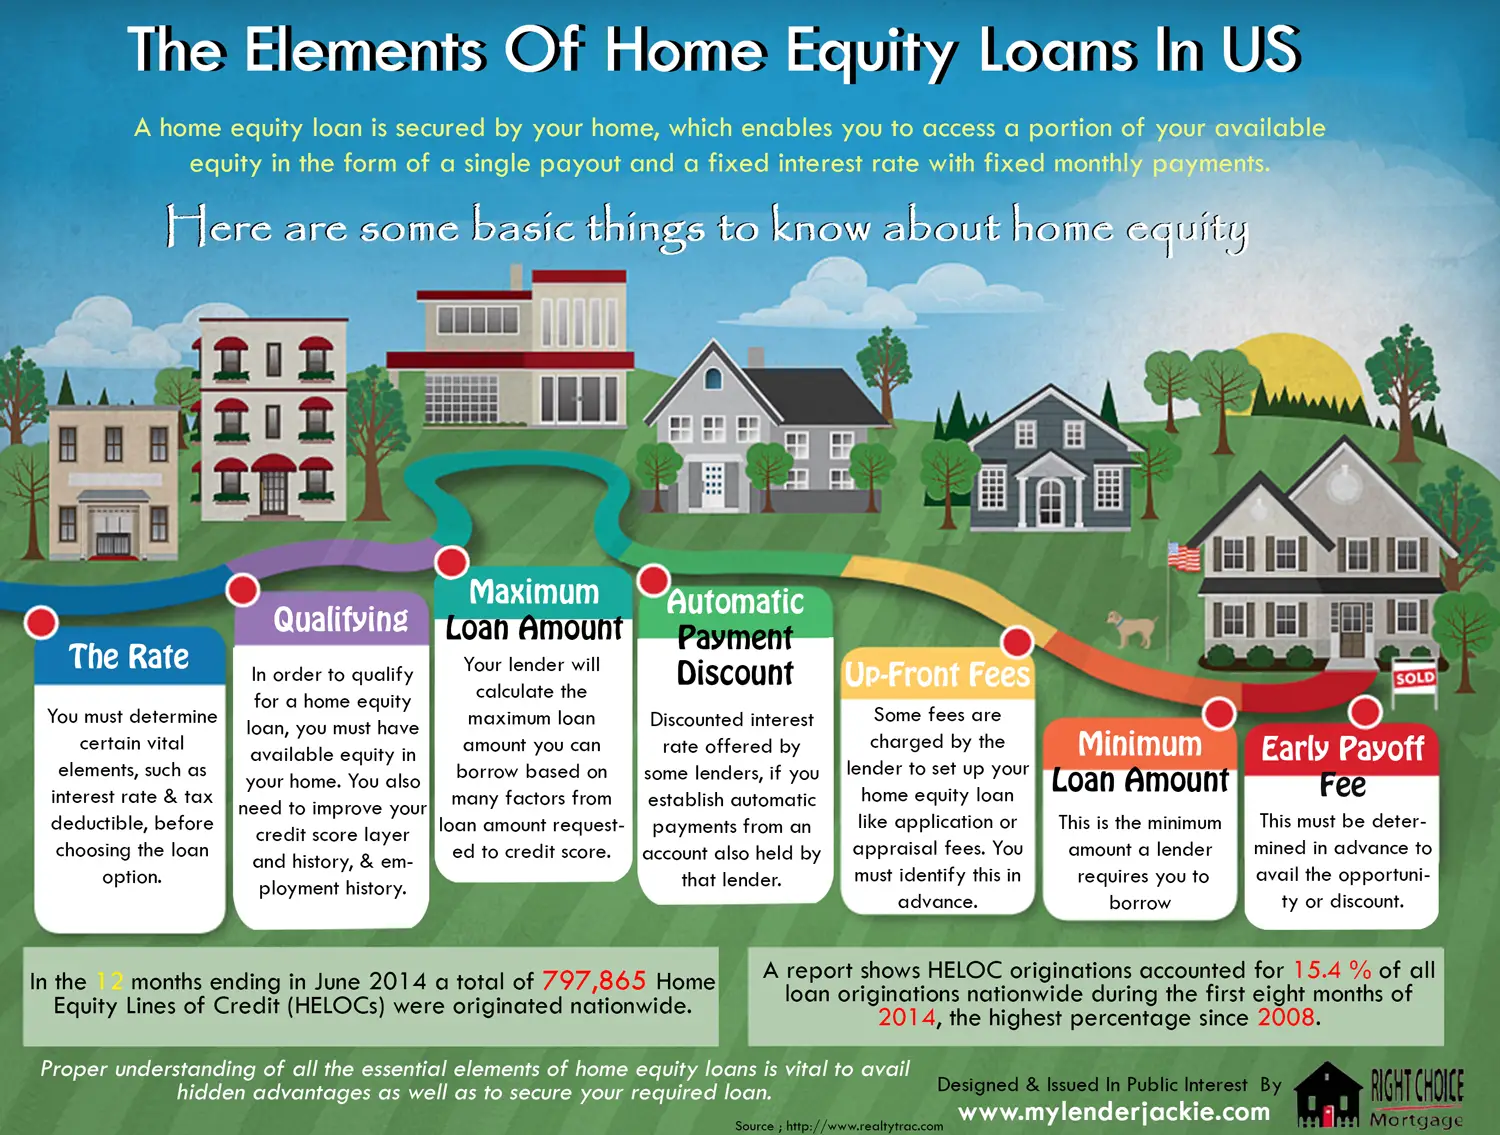 The Elements Of Home Equity Loans In US